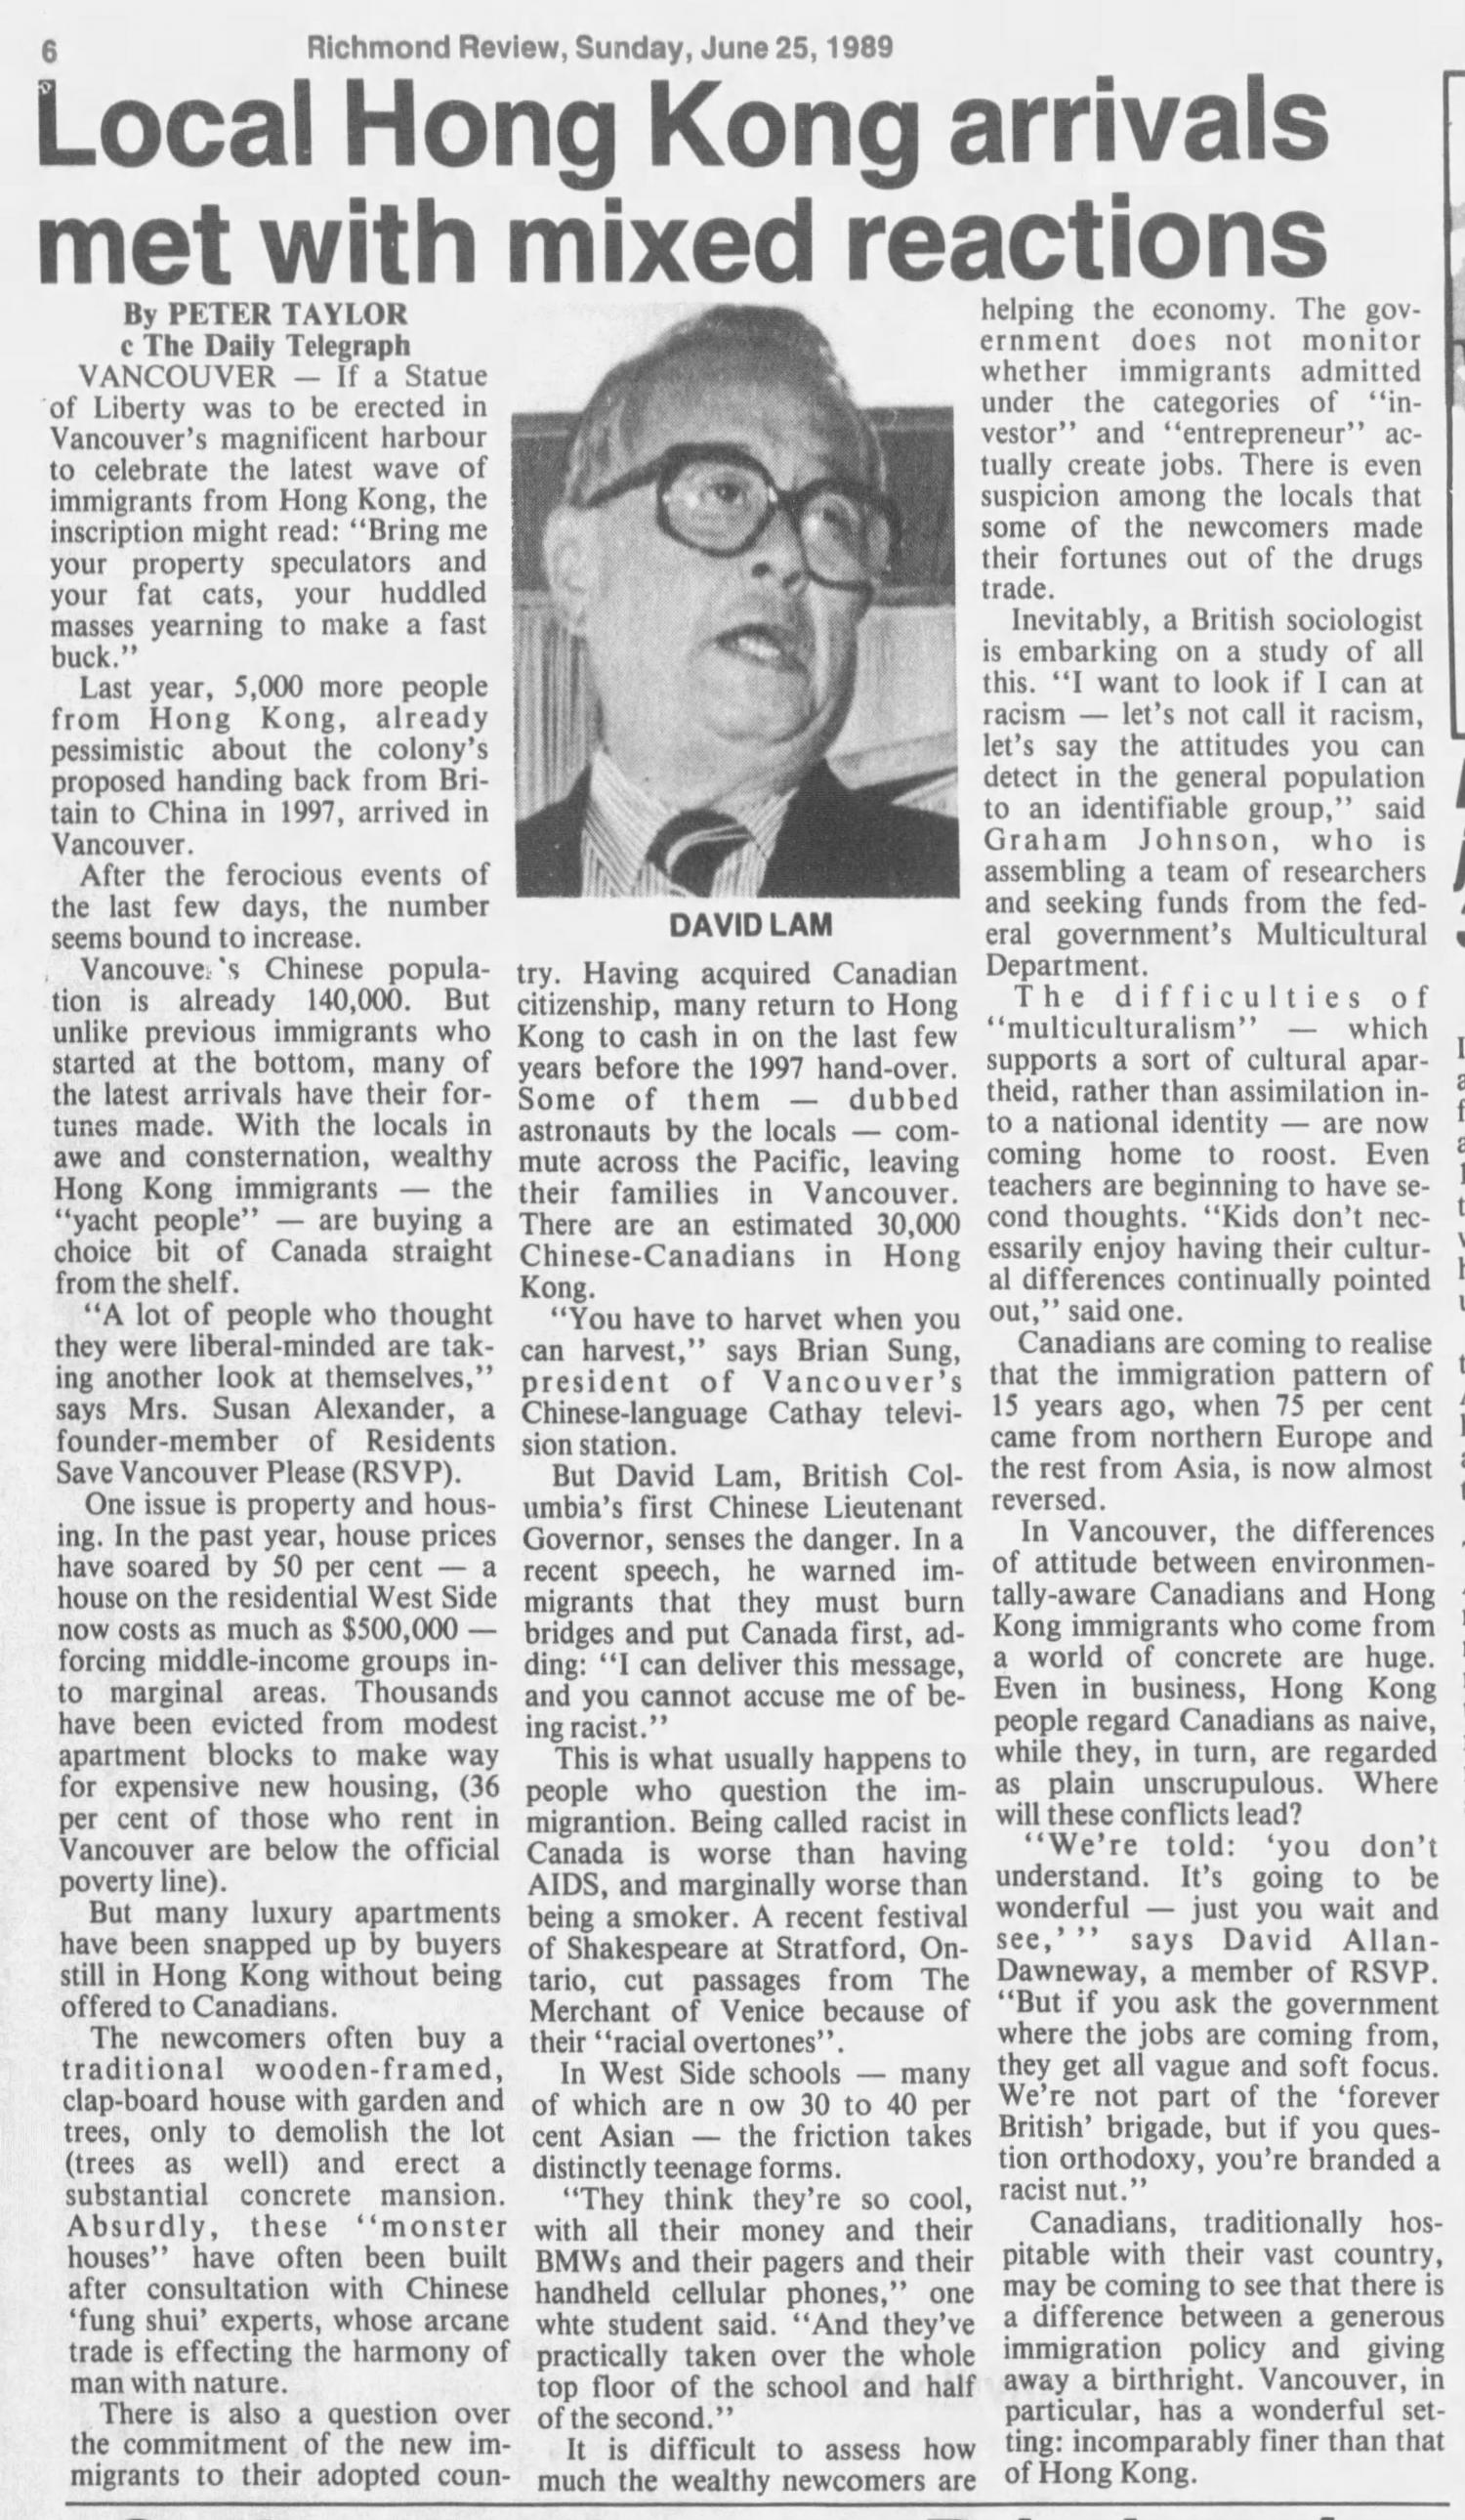 Article on Hong Kong immigration to B.C. in 1989.